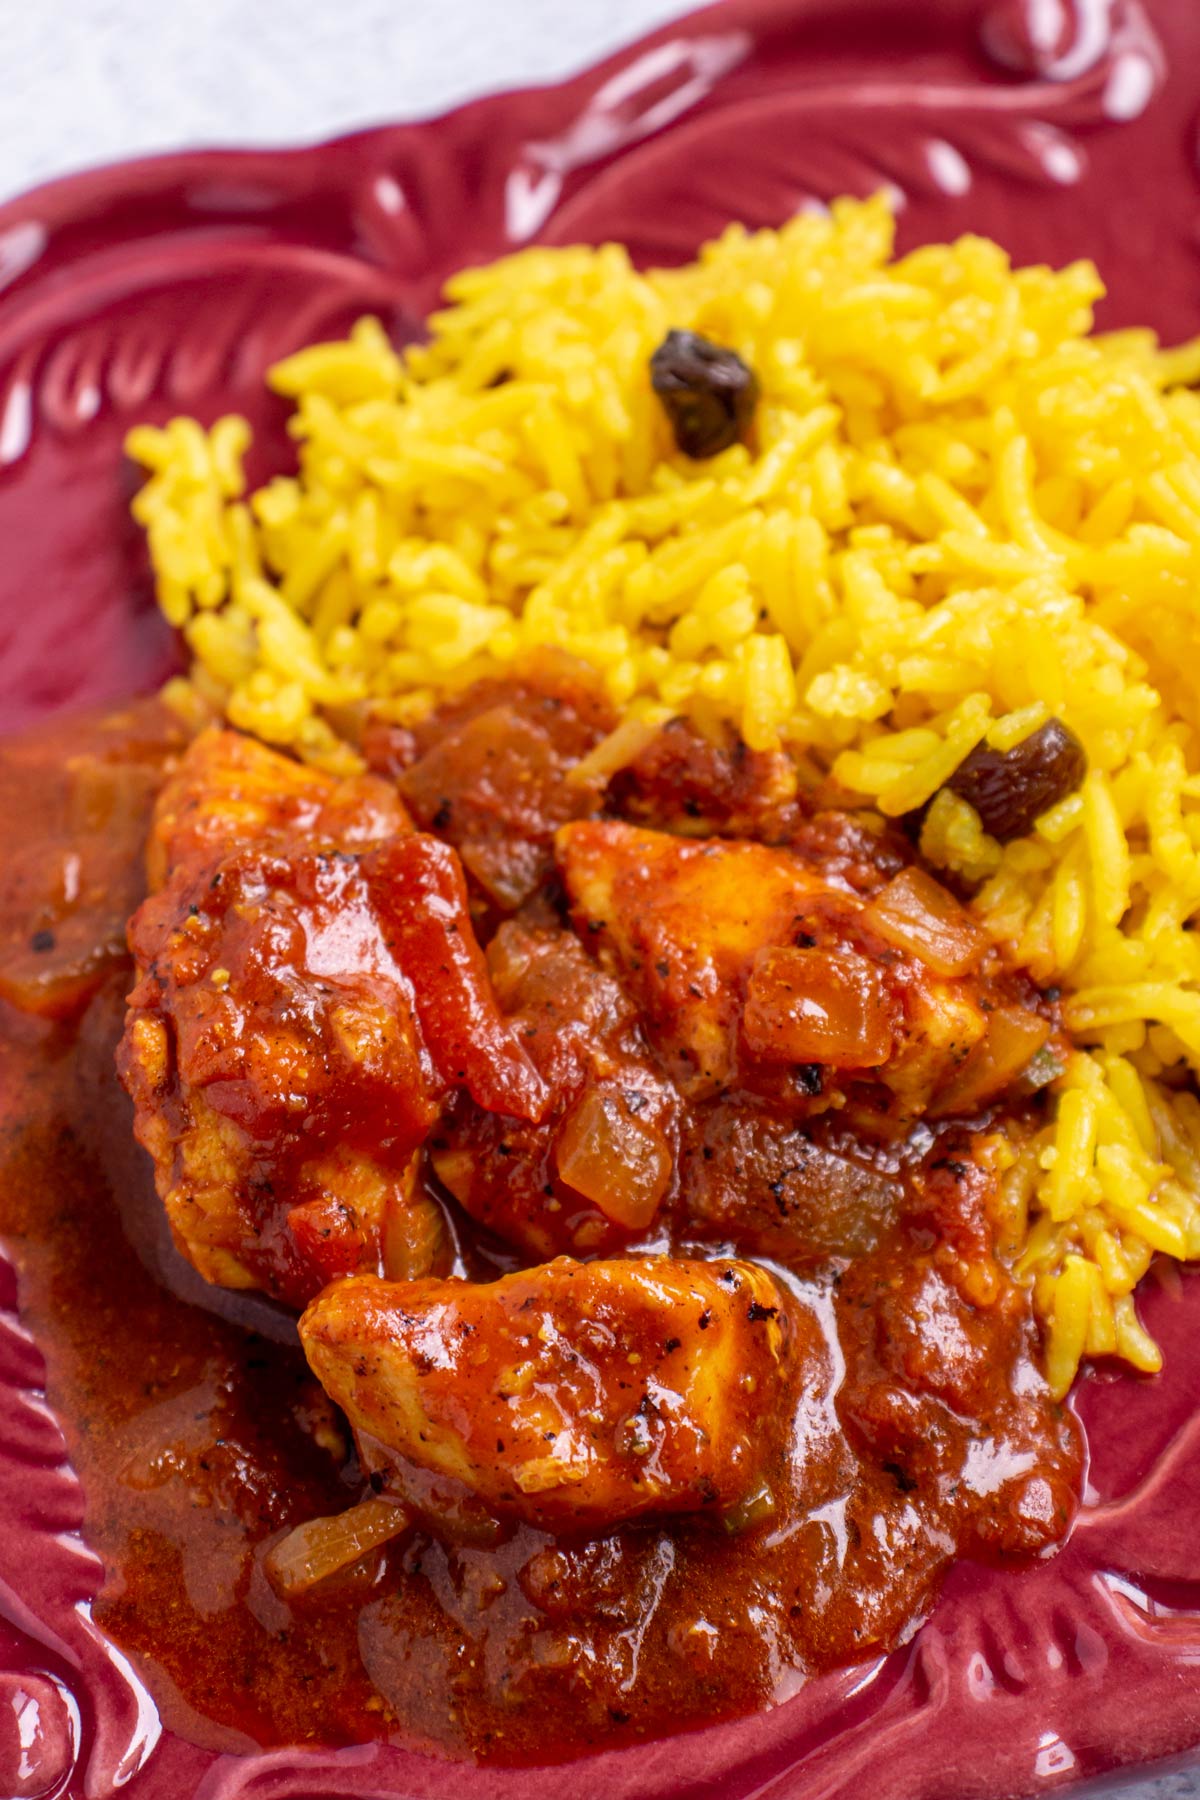 Chicken curry in tomato sauce with yellow rice on a dark red plate.